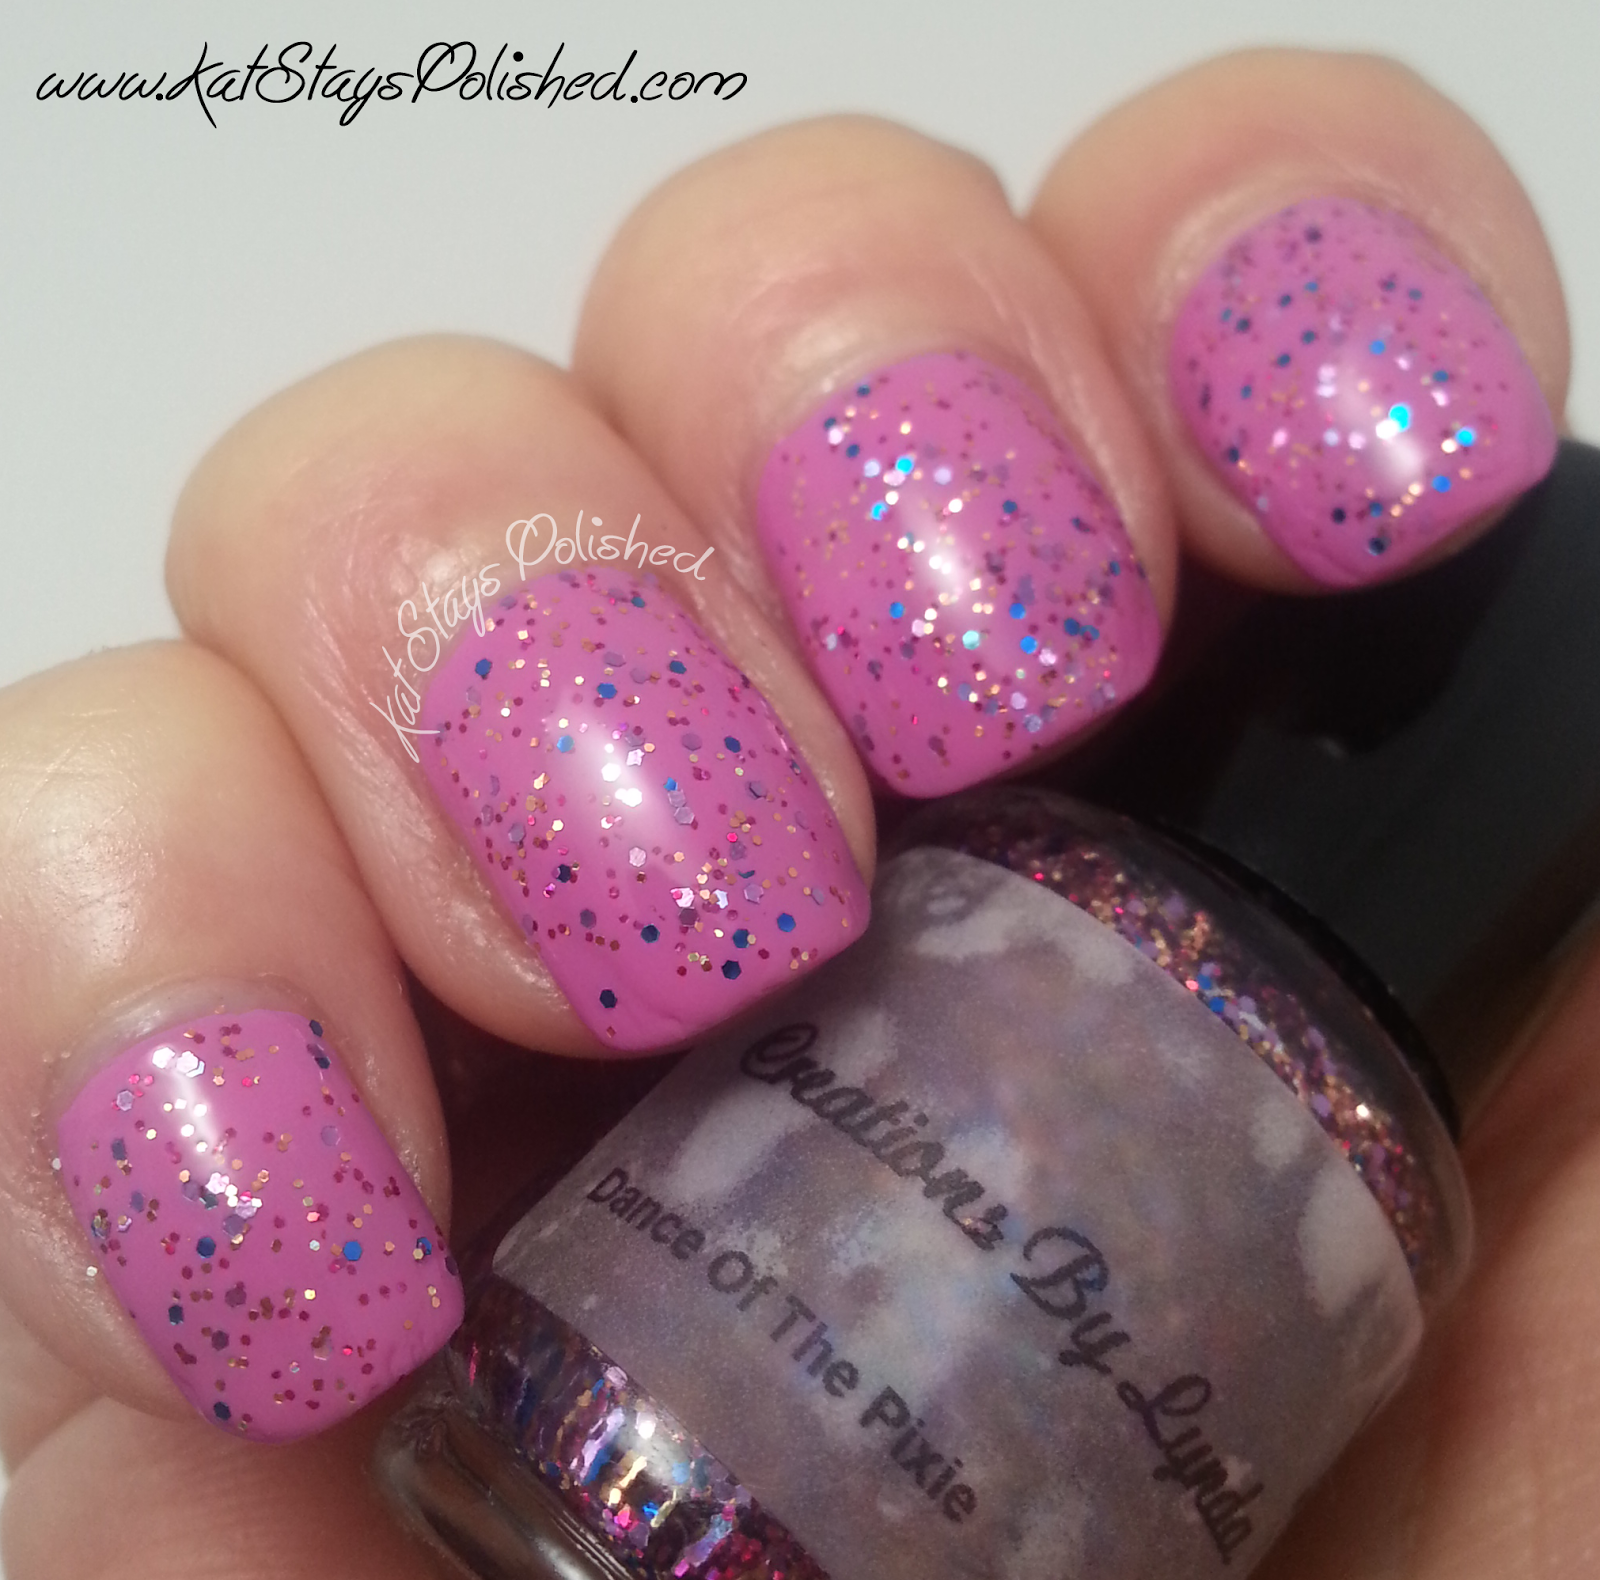 Creations by Lynda - Dance of the Pixie | Kat Stays Polished